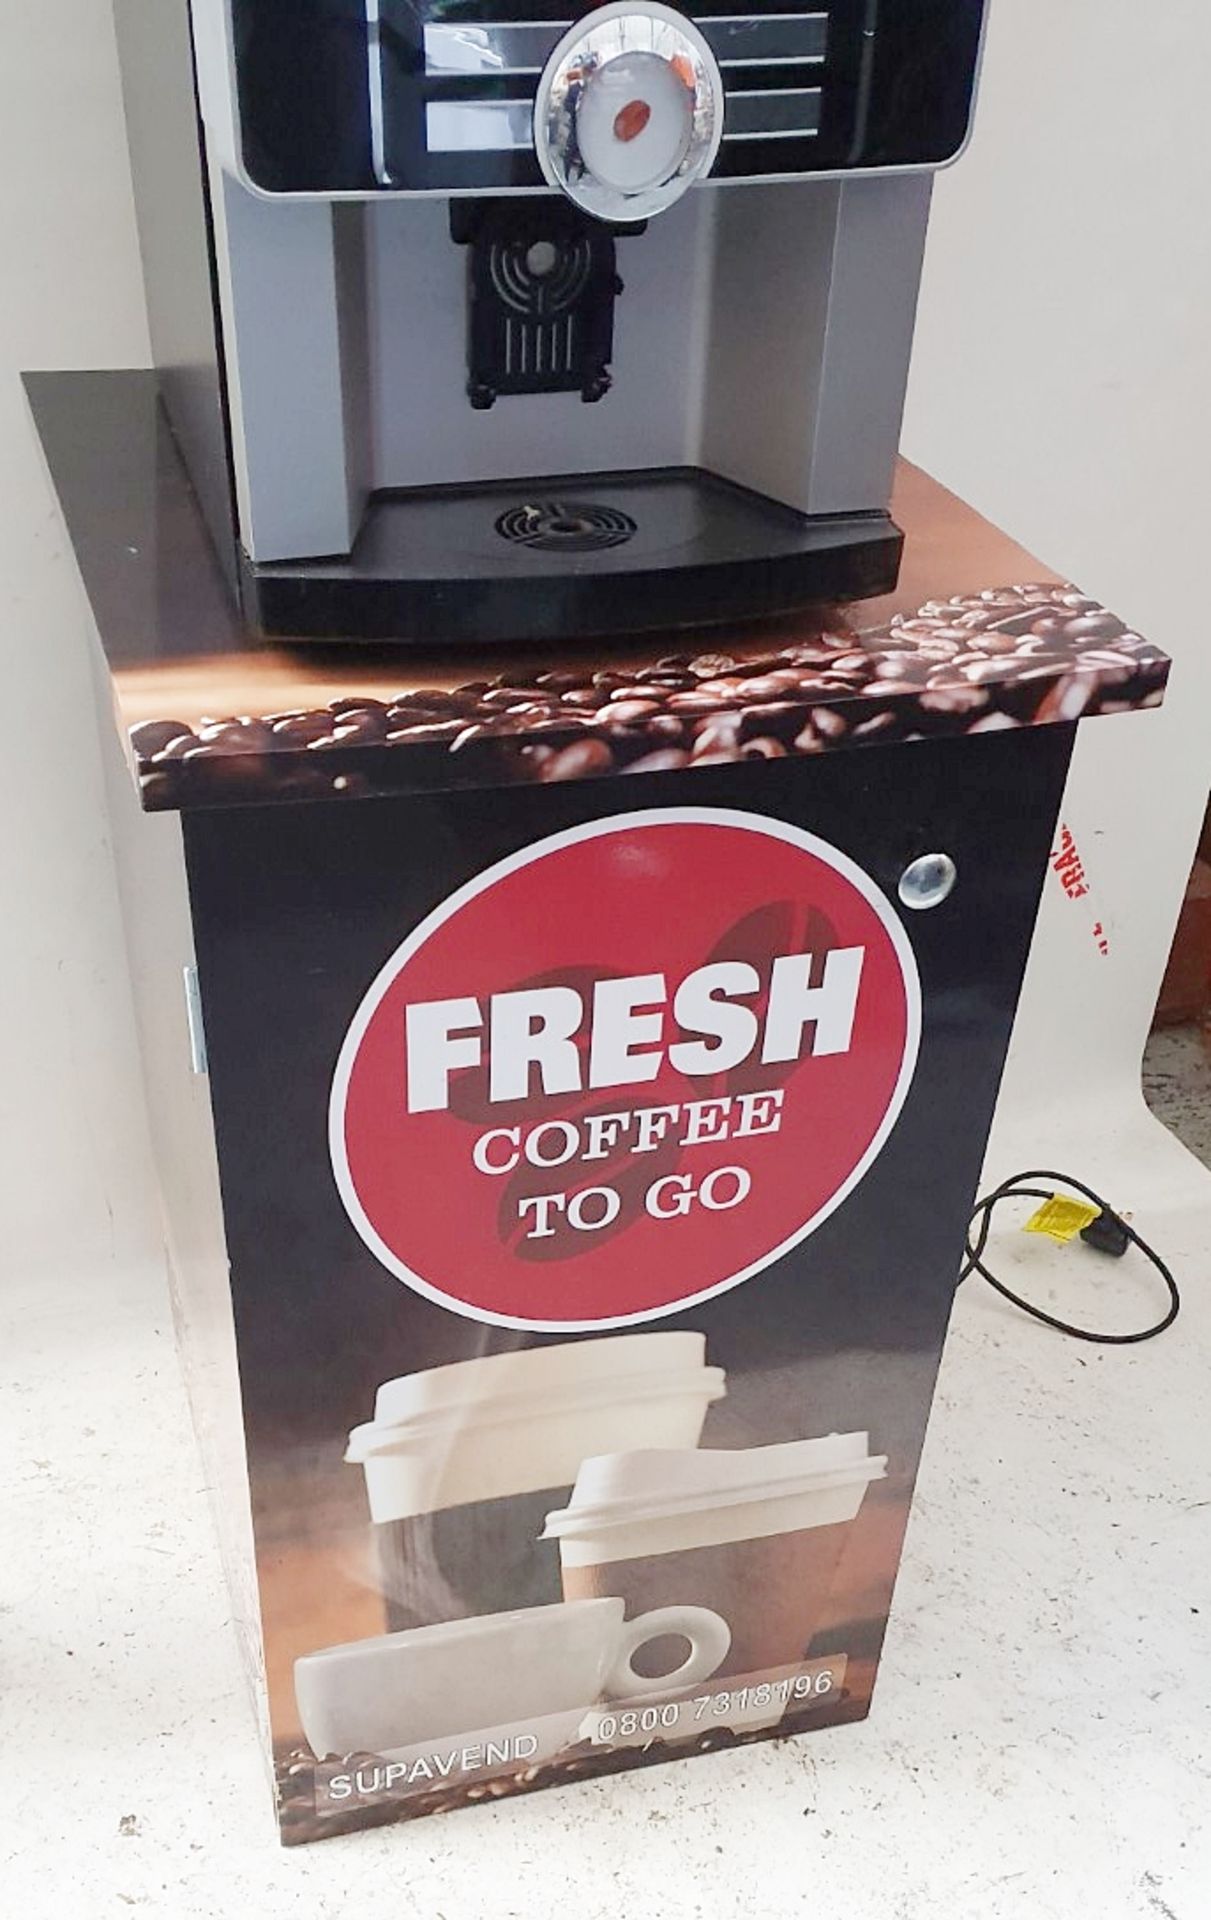 1 x Rheavendors eC Commercial Coffee Machine With Stand and Sign - Ref: LD439 - CL445 - WA14 - Image 5 of 19